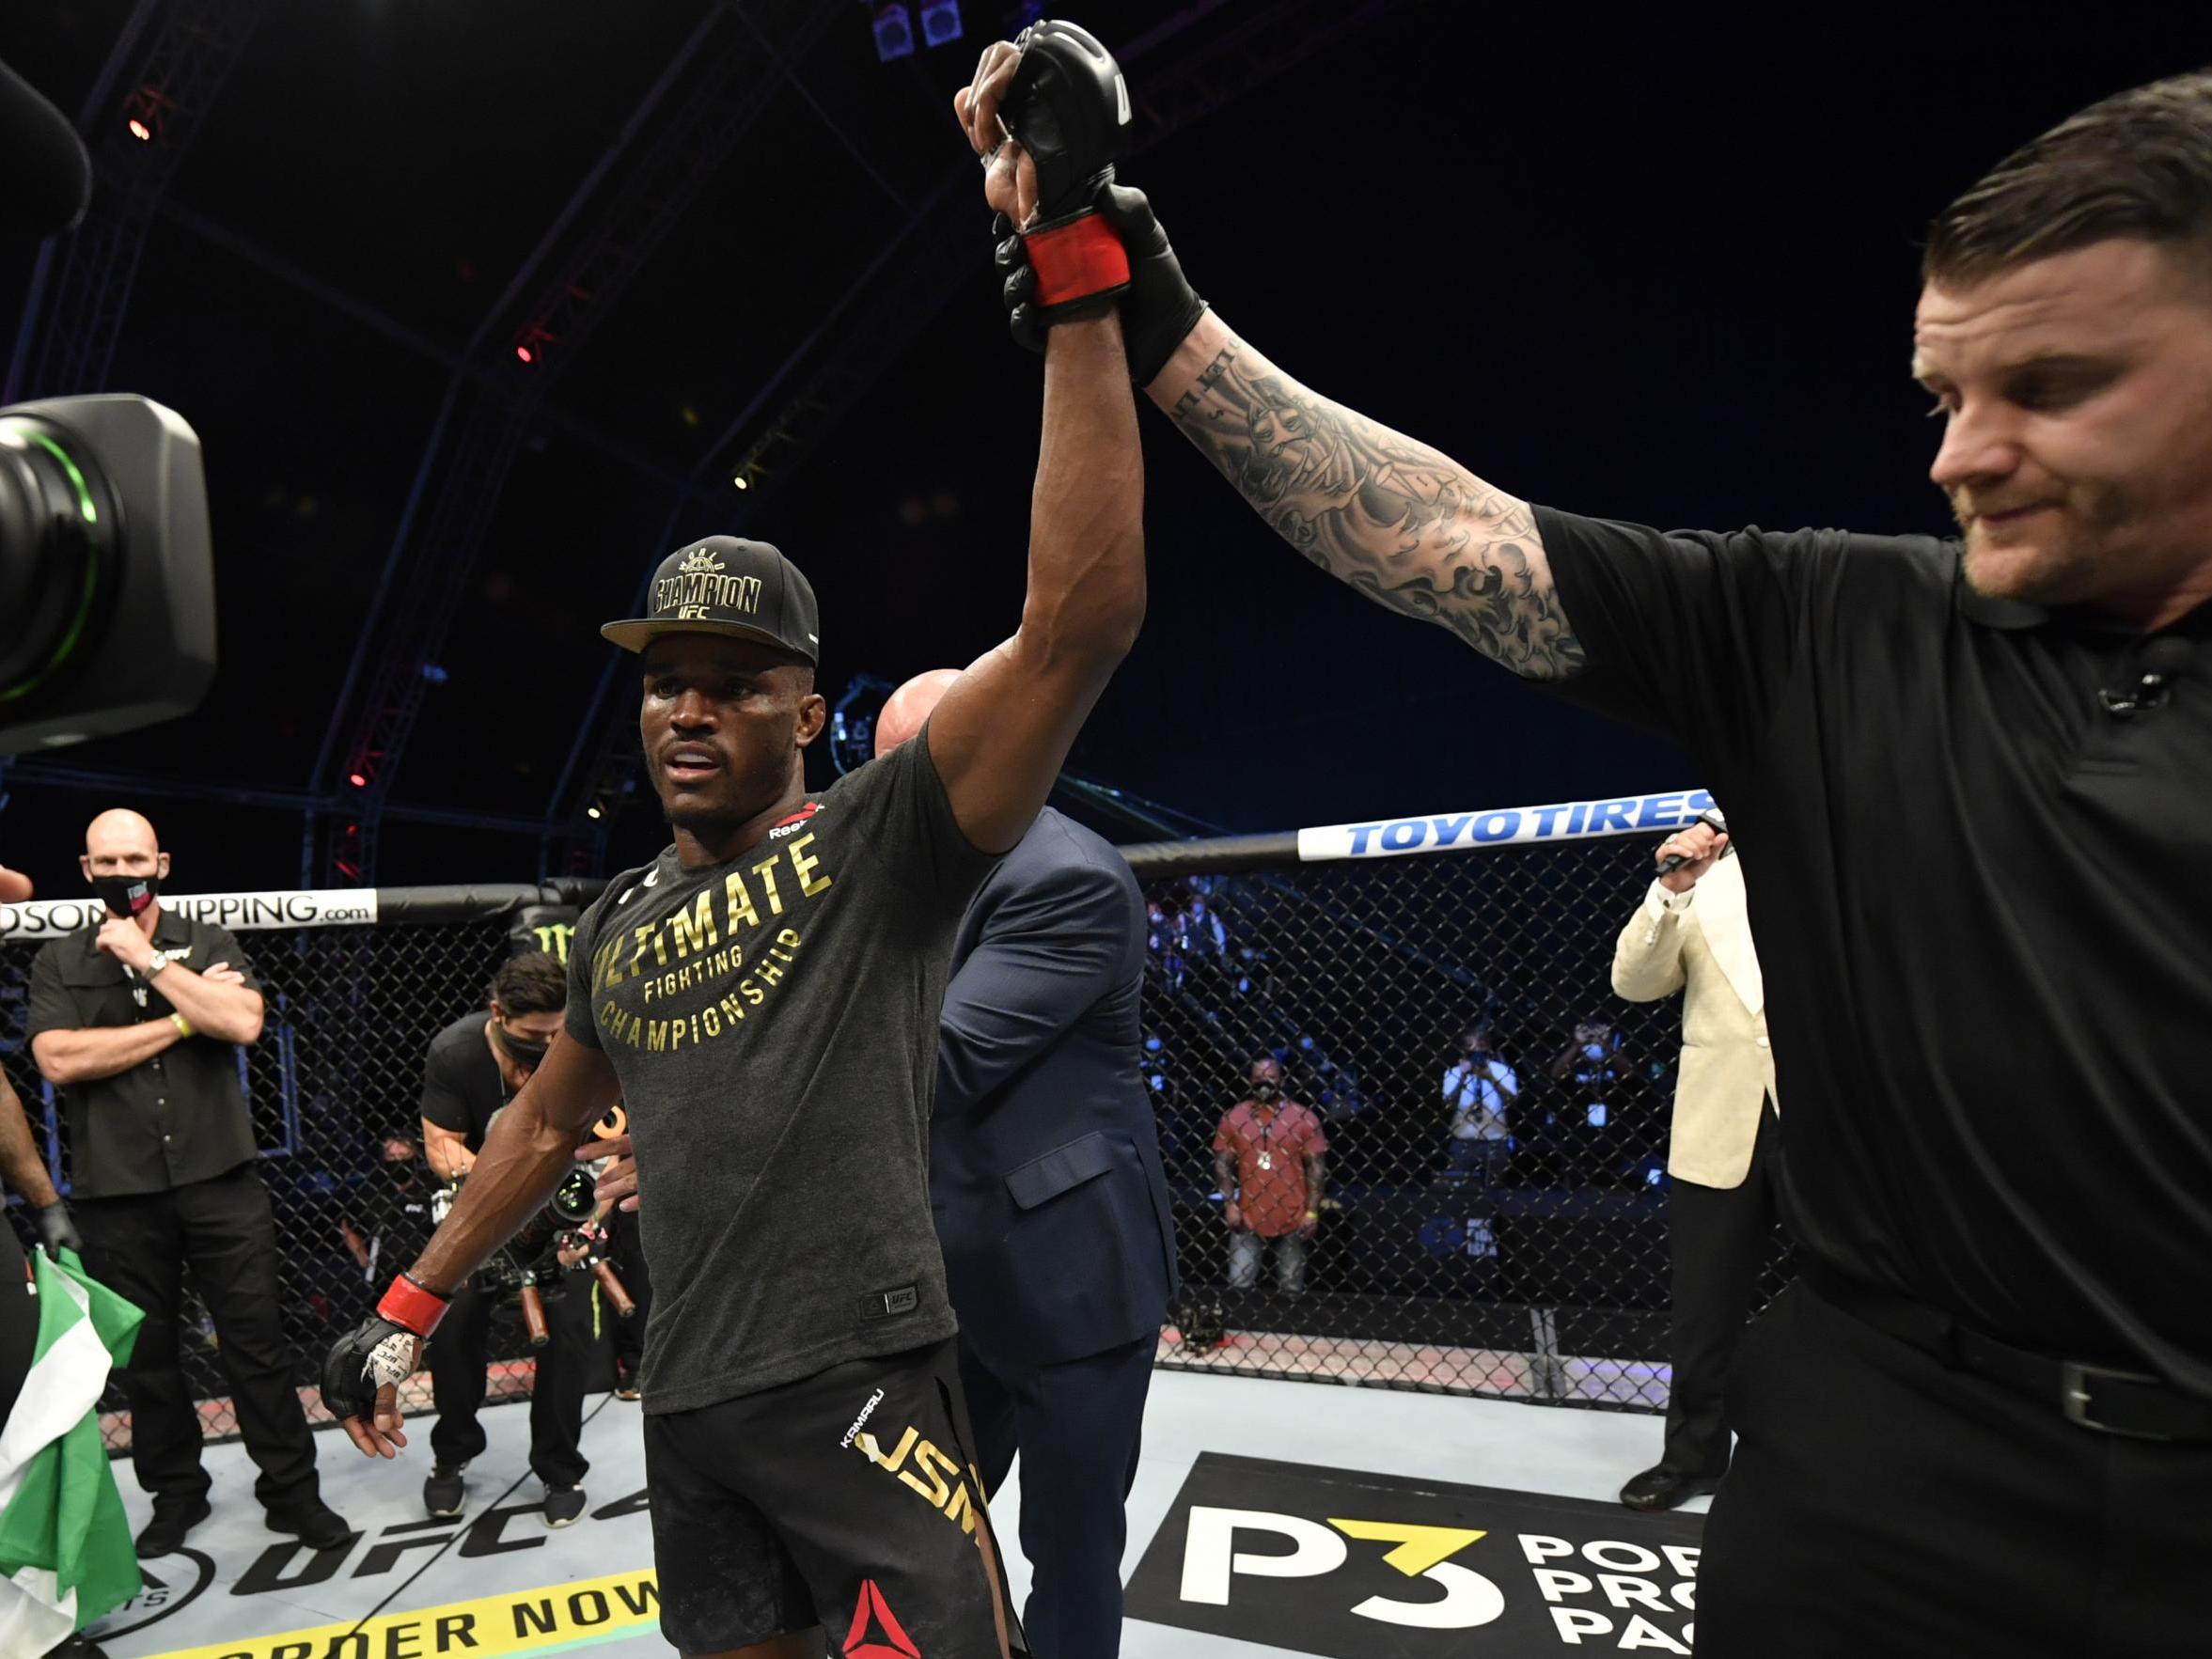 Usman extended his win streak to 16 at UFC 251